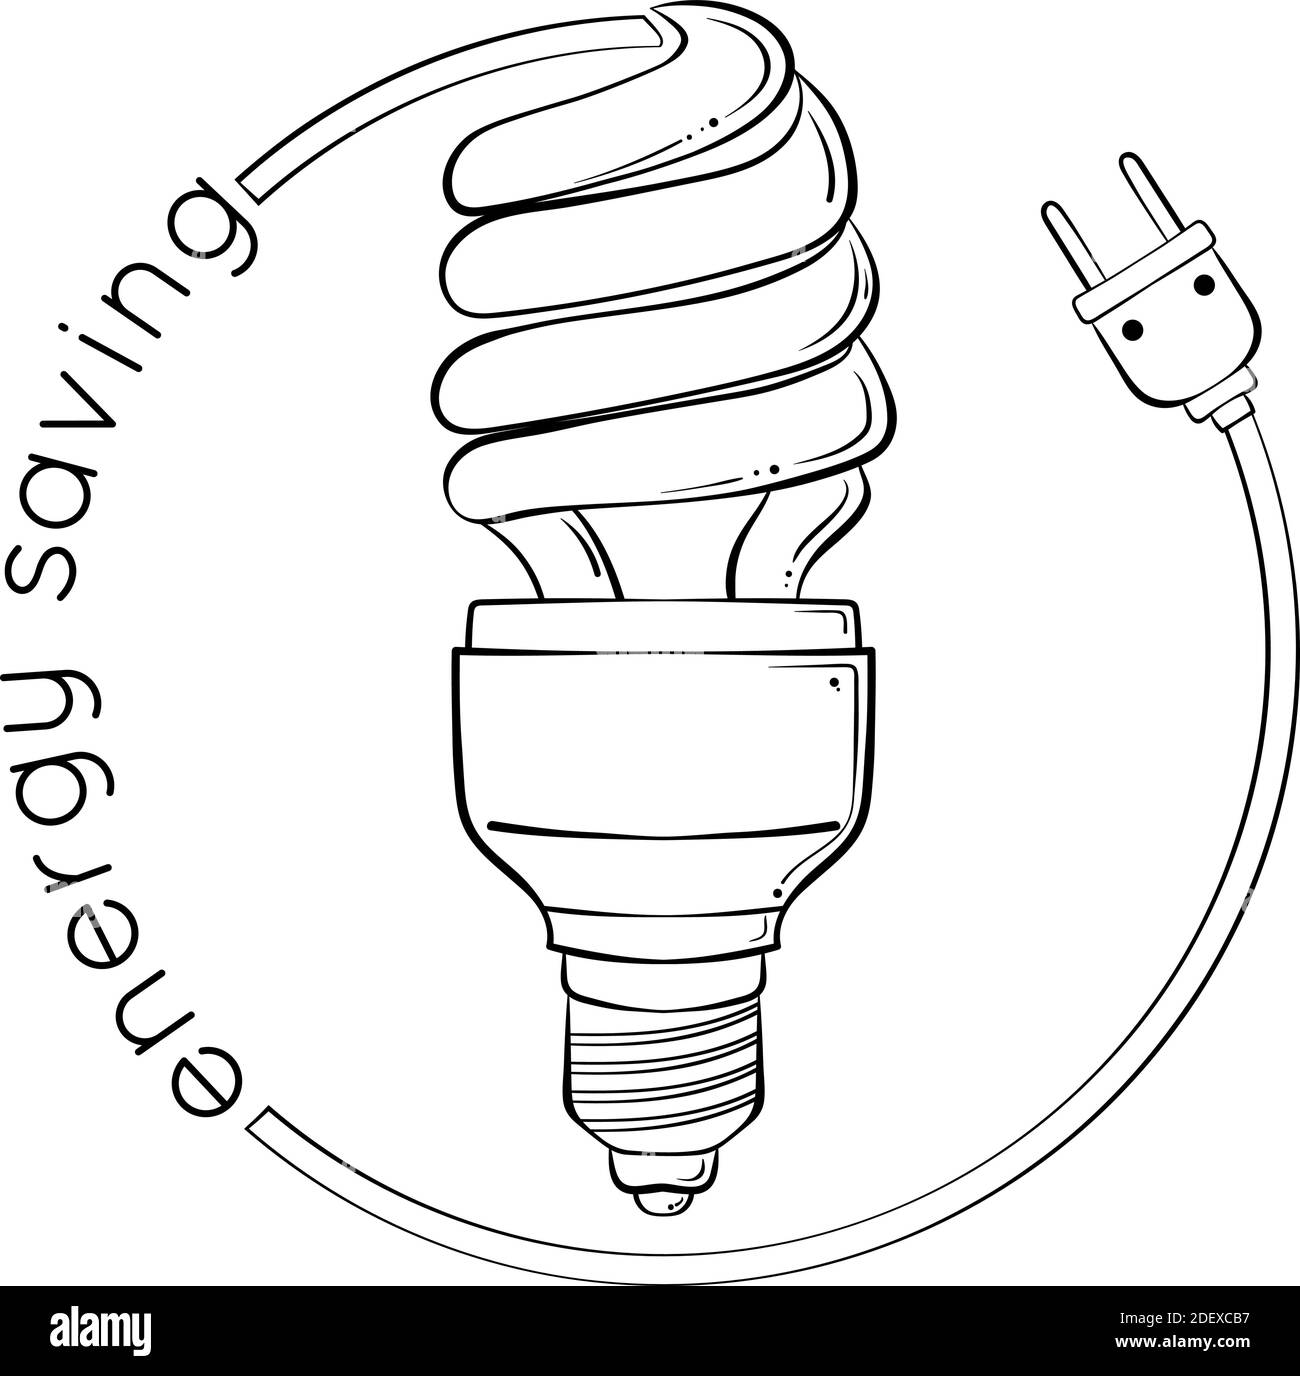 Energy saving concept. Energy-saving bulb. Hand drawn vector illustration with black outline isolated on white background. Illustration for T-shirts, postcards, coloring book, icon and logo idea. Stock Vector